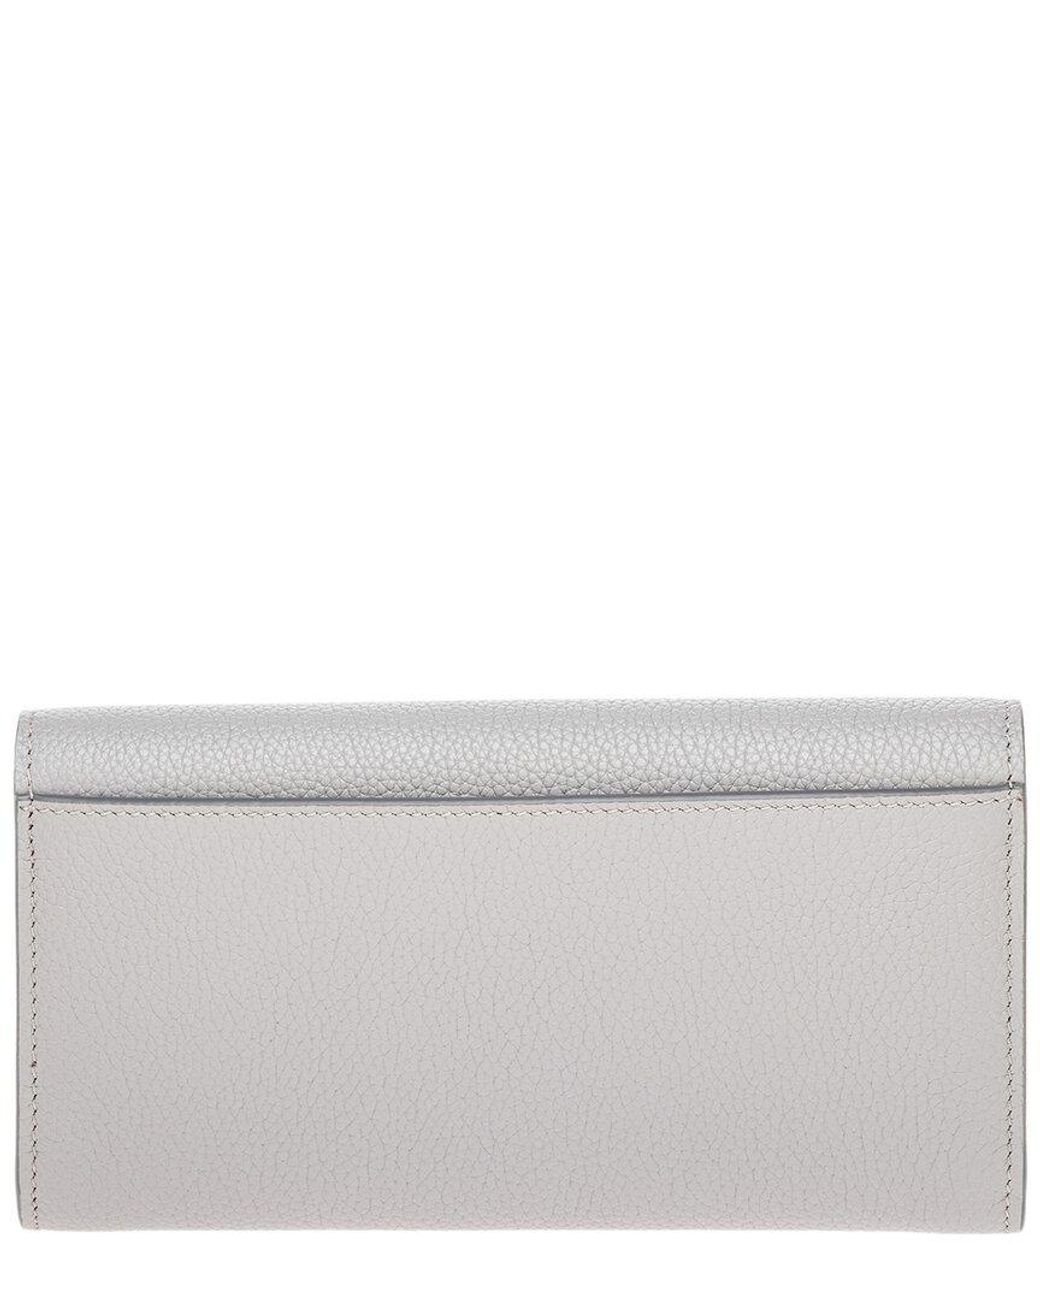 Grainy Leather TB Compact Wallet in Oat Beige - Women | Burberry® Official